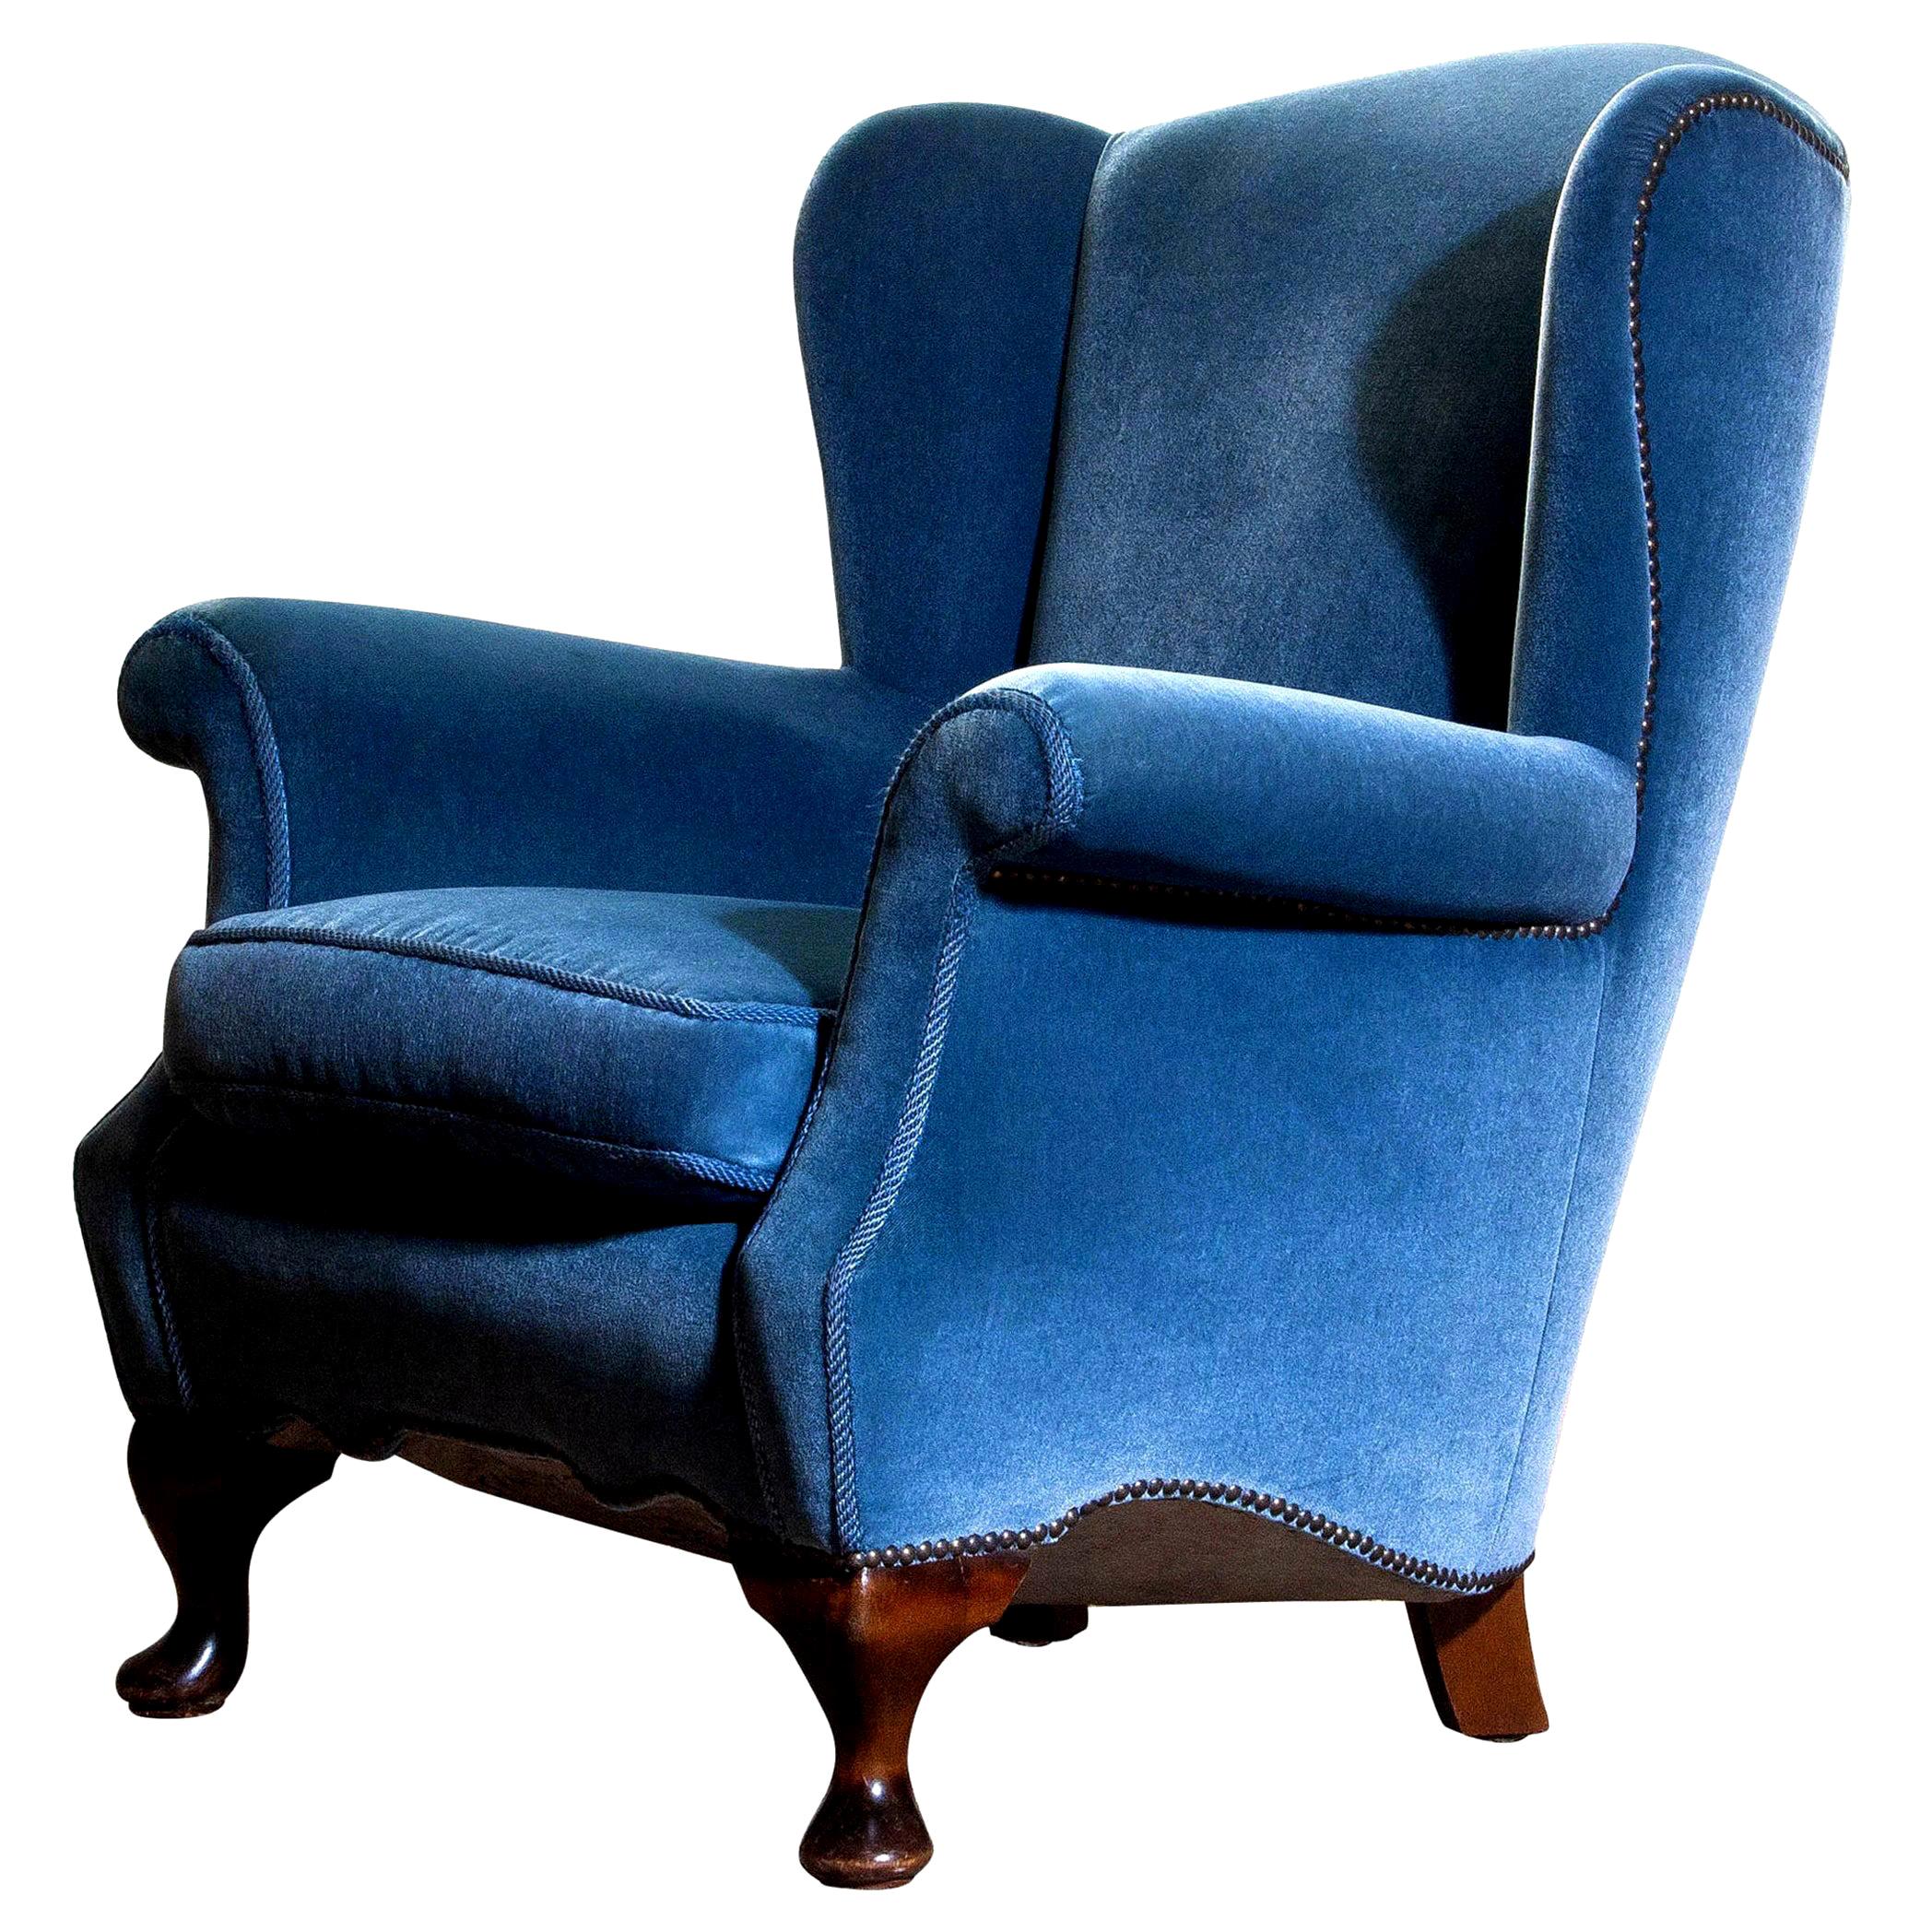 Unique and extremely beautiful Hollywood Regency club chair in blue velvet from the 1920s.
The chair is completely restored in 1987 (only original materials are used).
The overall condition of this chair is very comfortable and good condition.
 